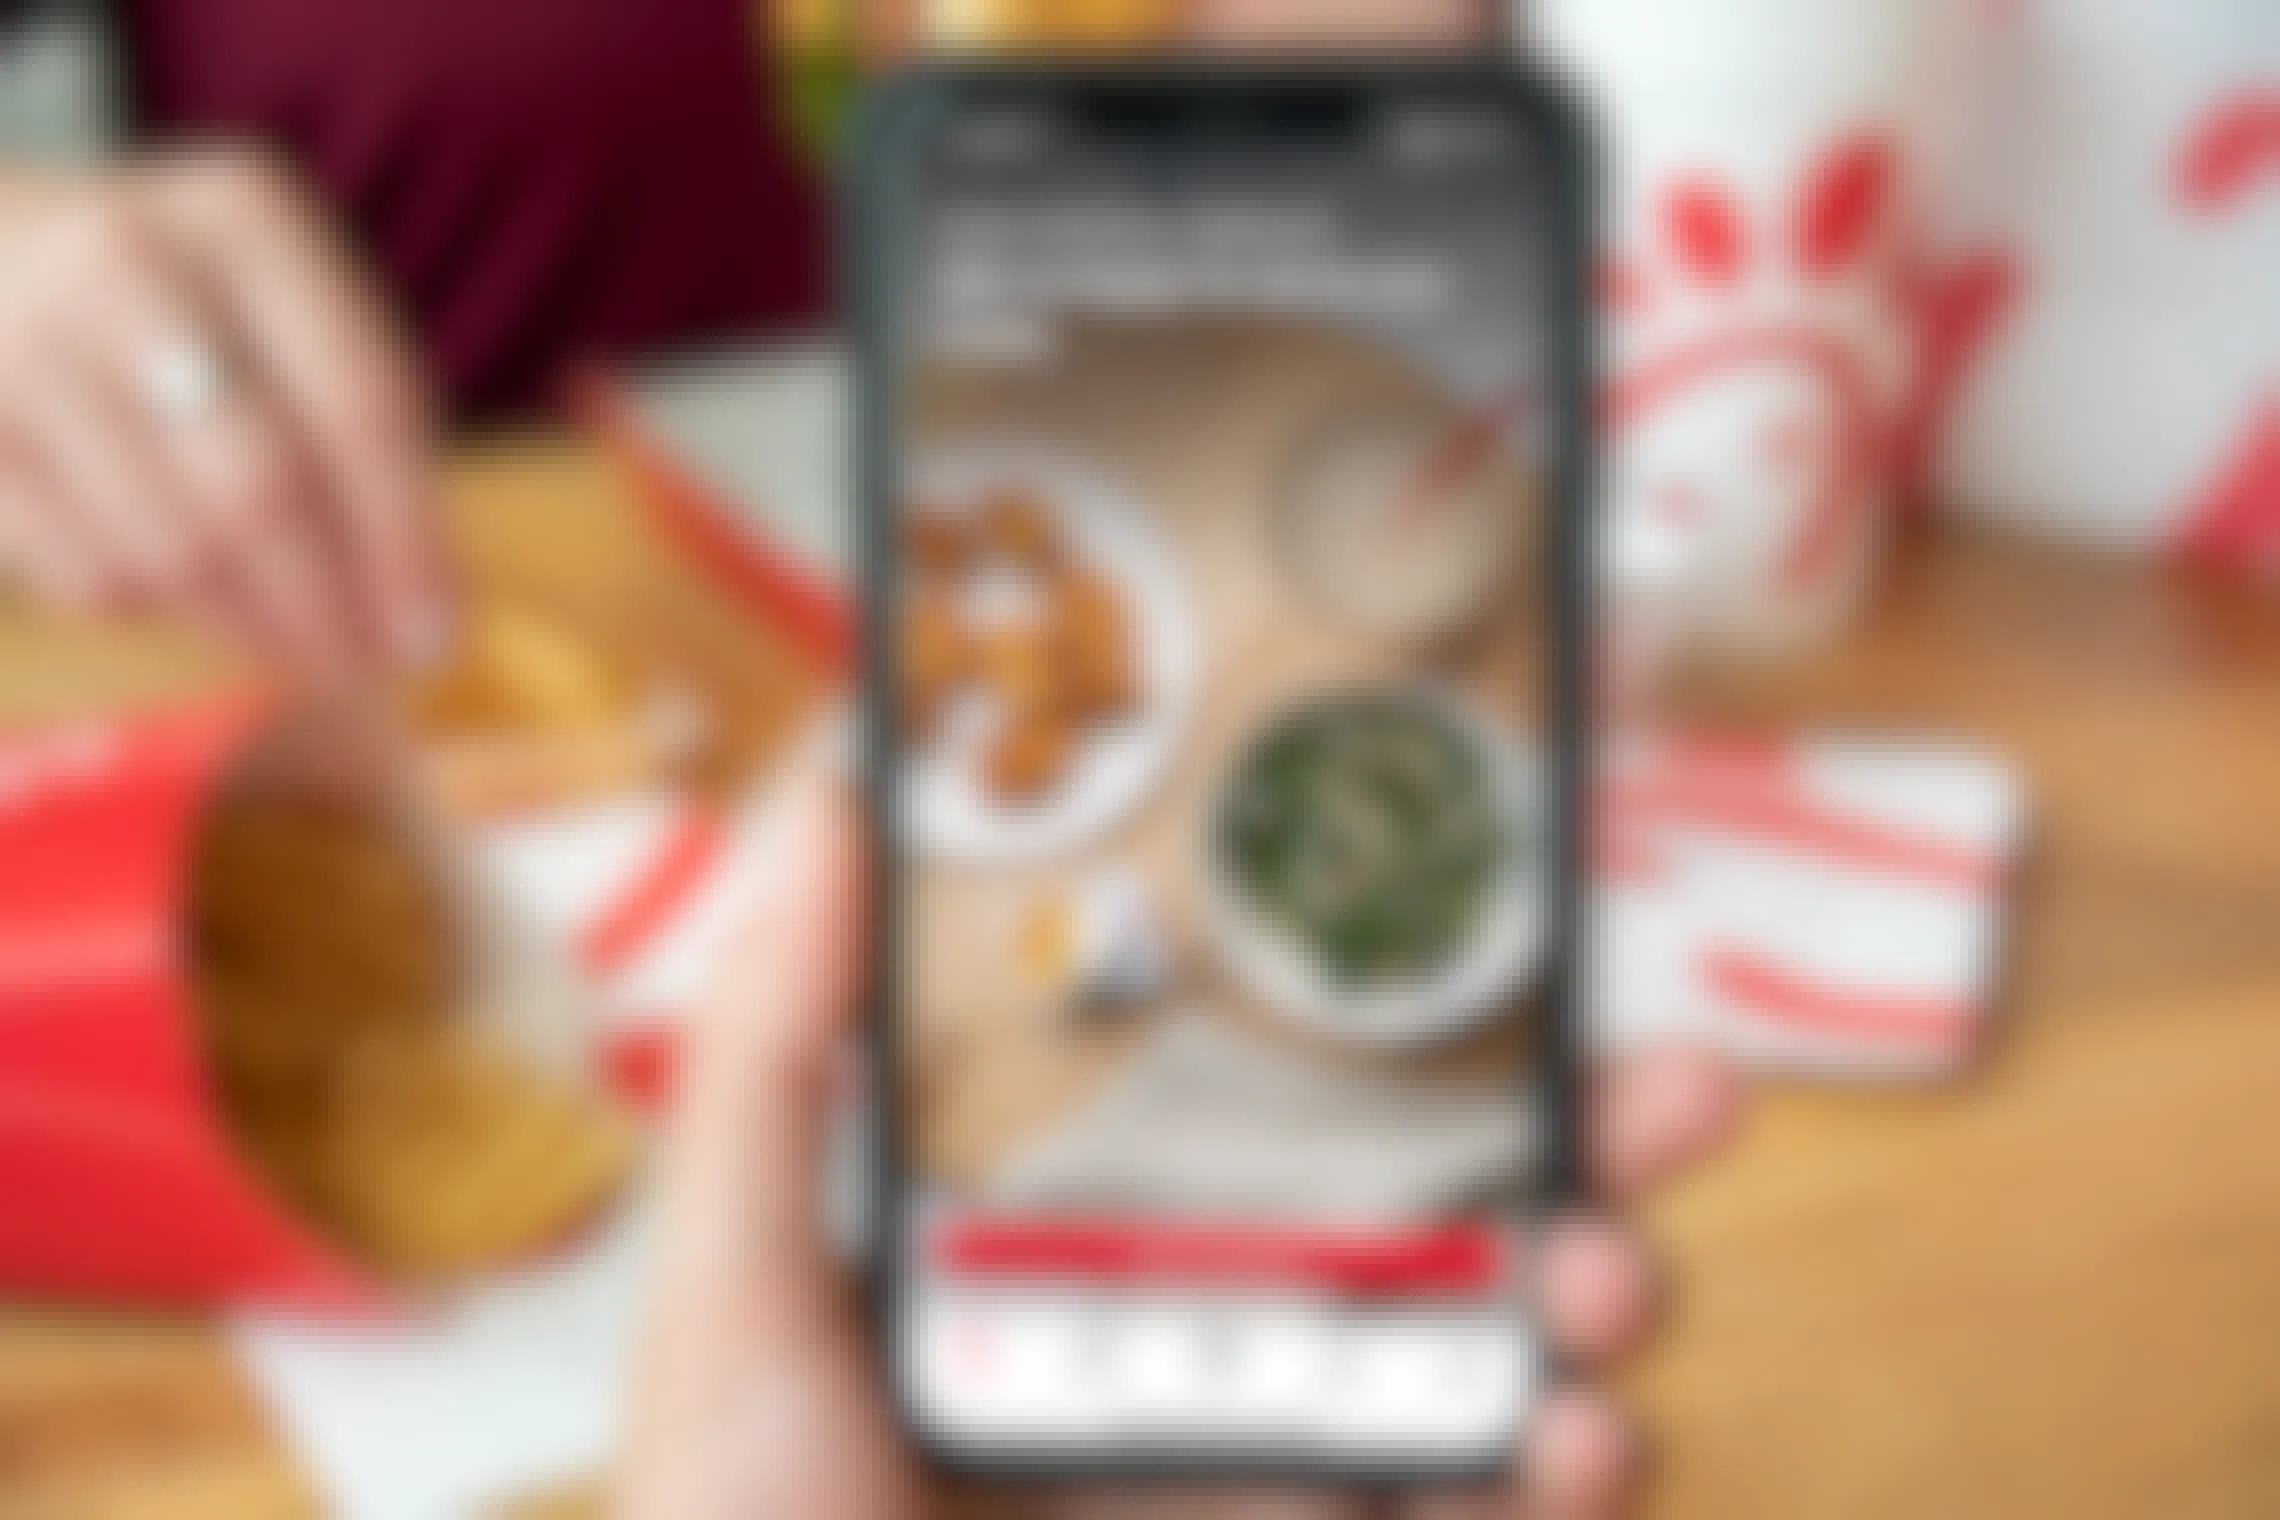 Chick-fil-a app on a cell phone with a person eating chick-fil-a in the background.